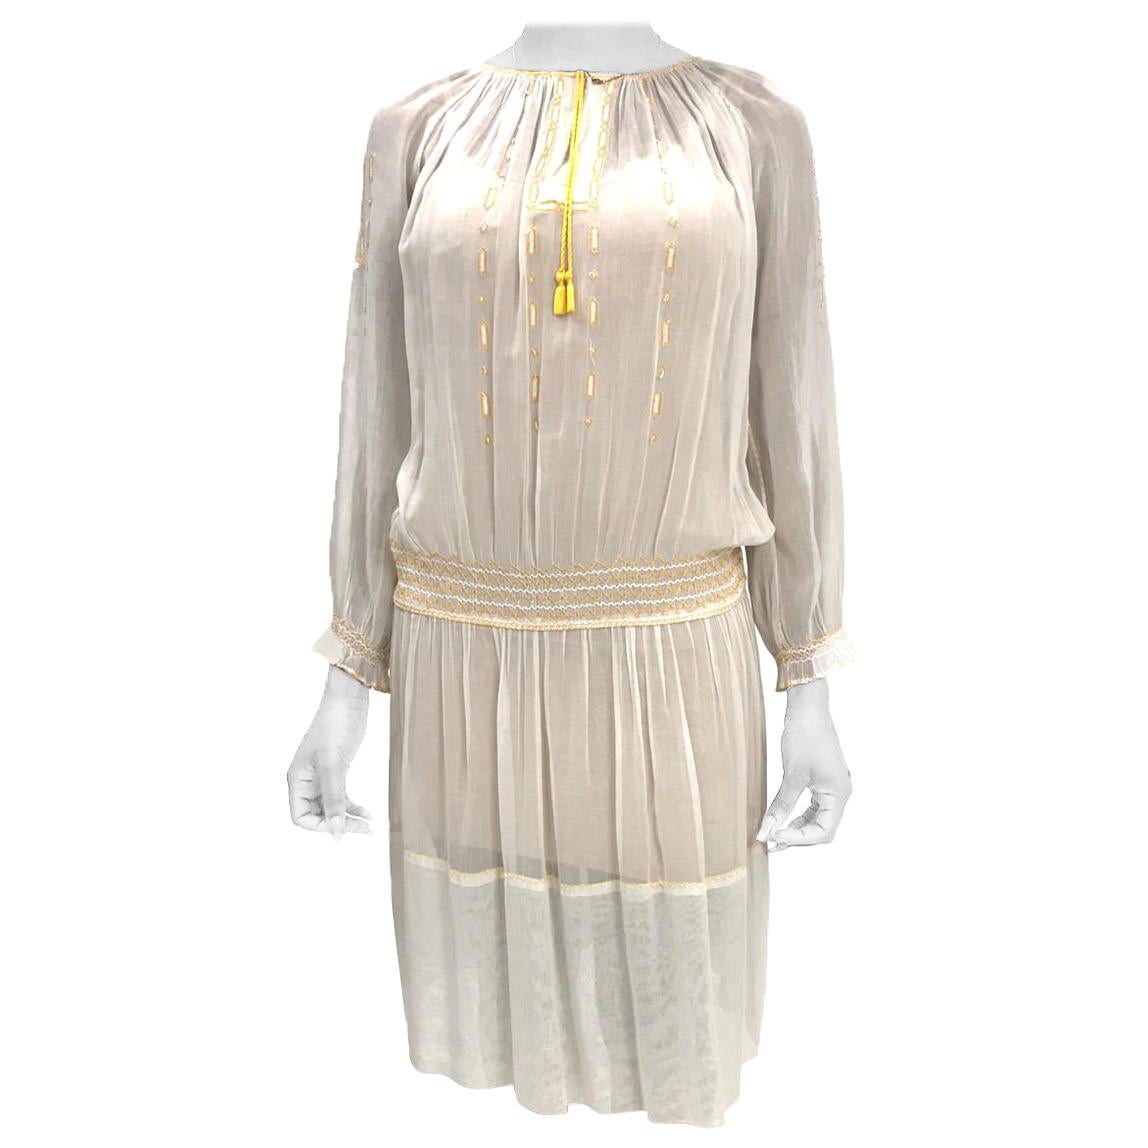 1920S Sheer Cotton Boho Folk Dress With Yellow Hand Embroidery & Smocking For Sale